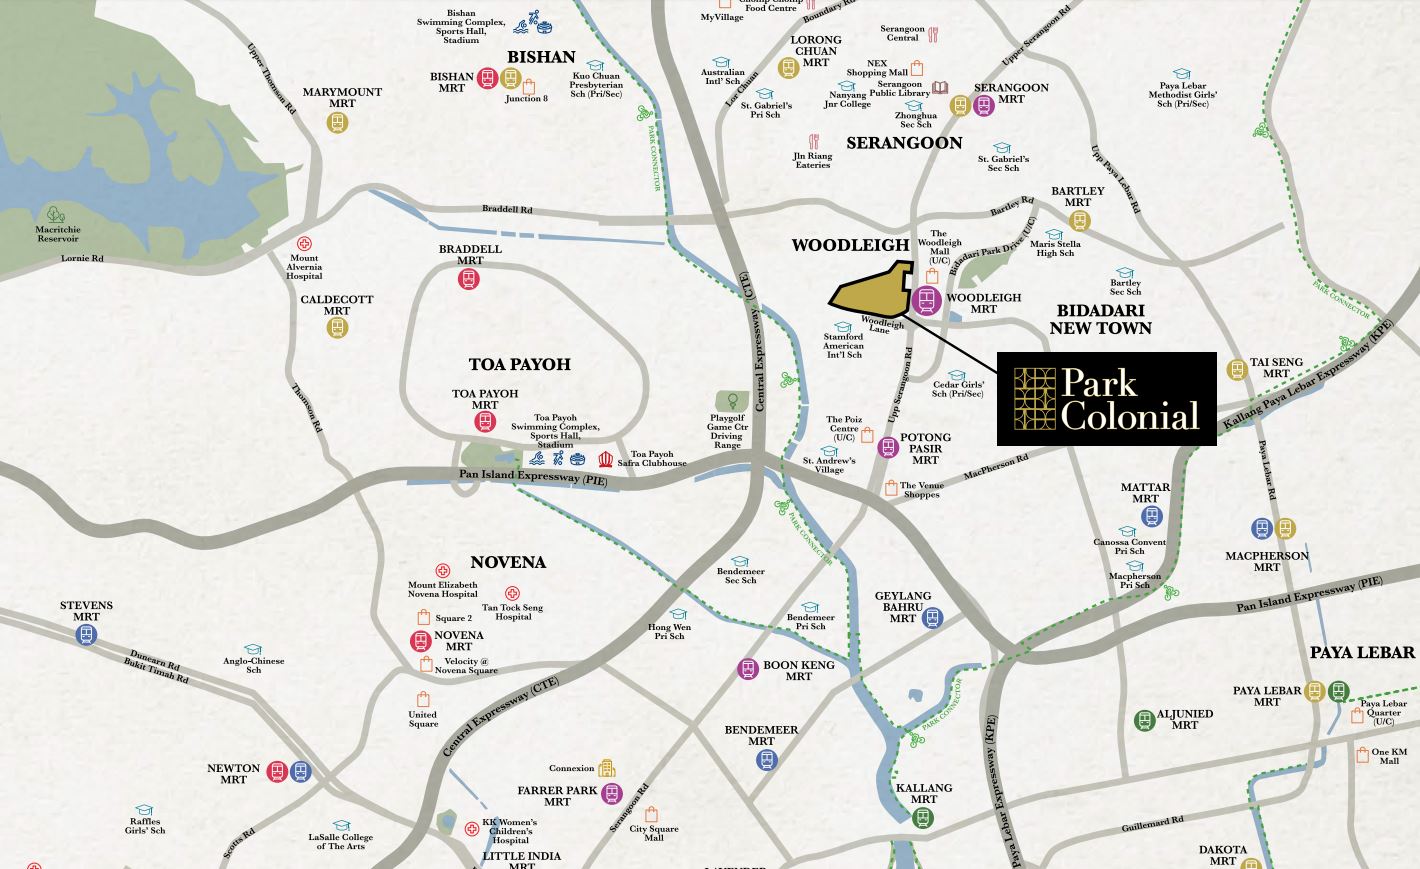 New Launch Condo with Park Colonial's location map